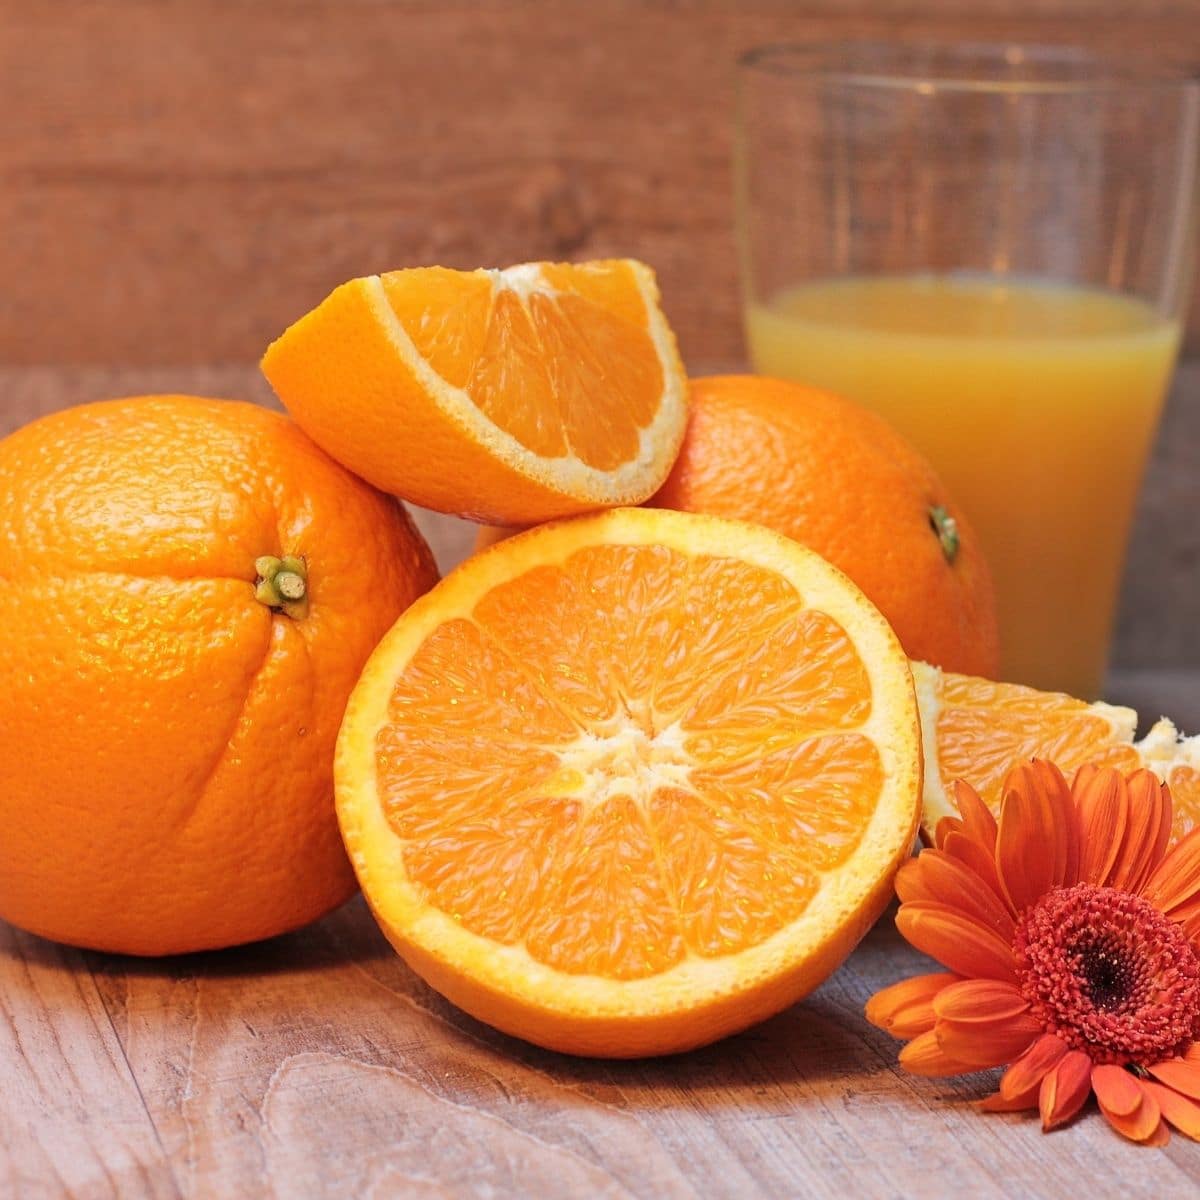 Orange juice and oranges on a table.